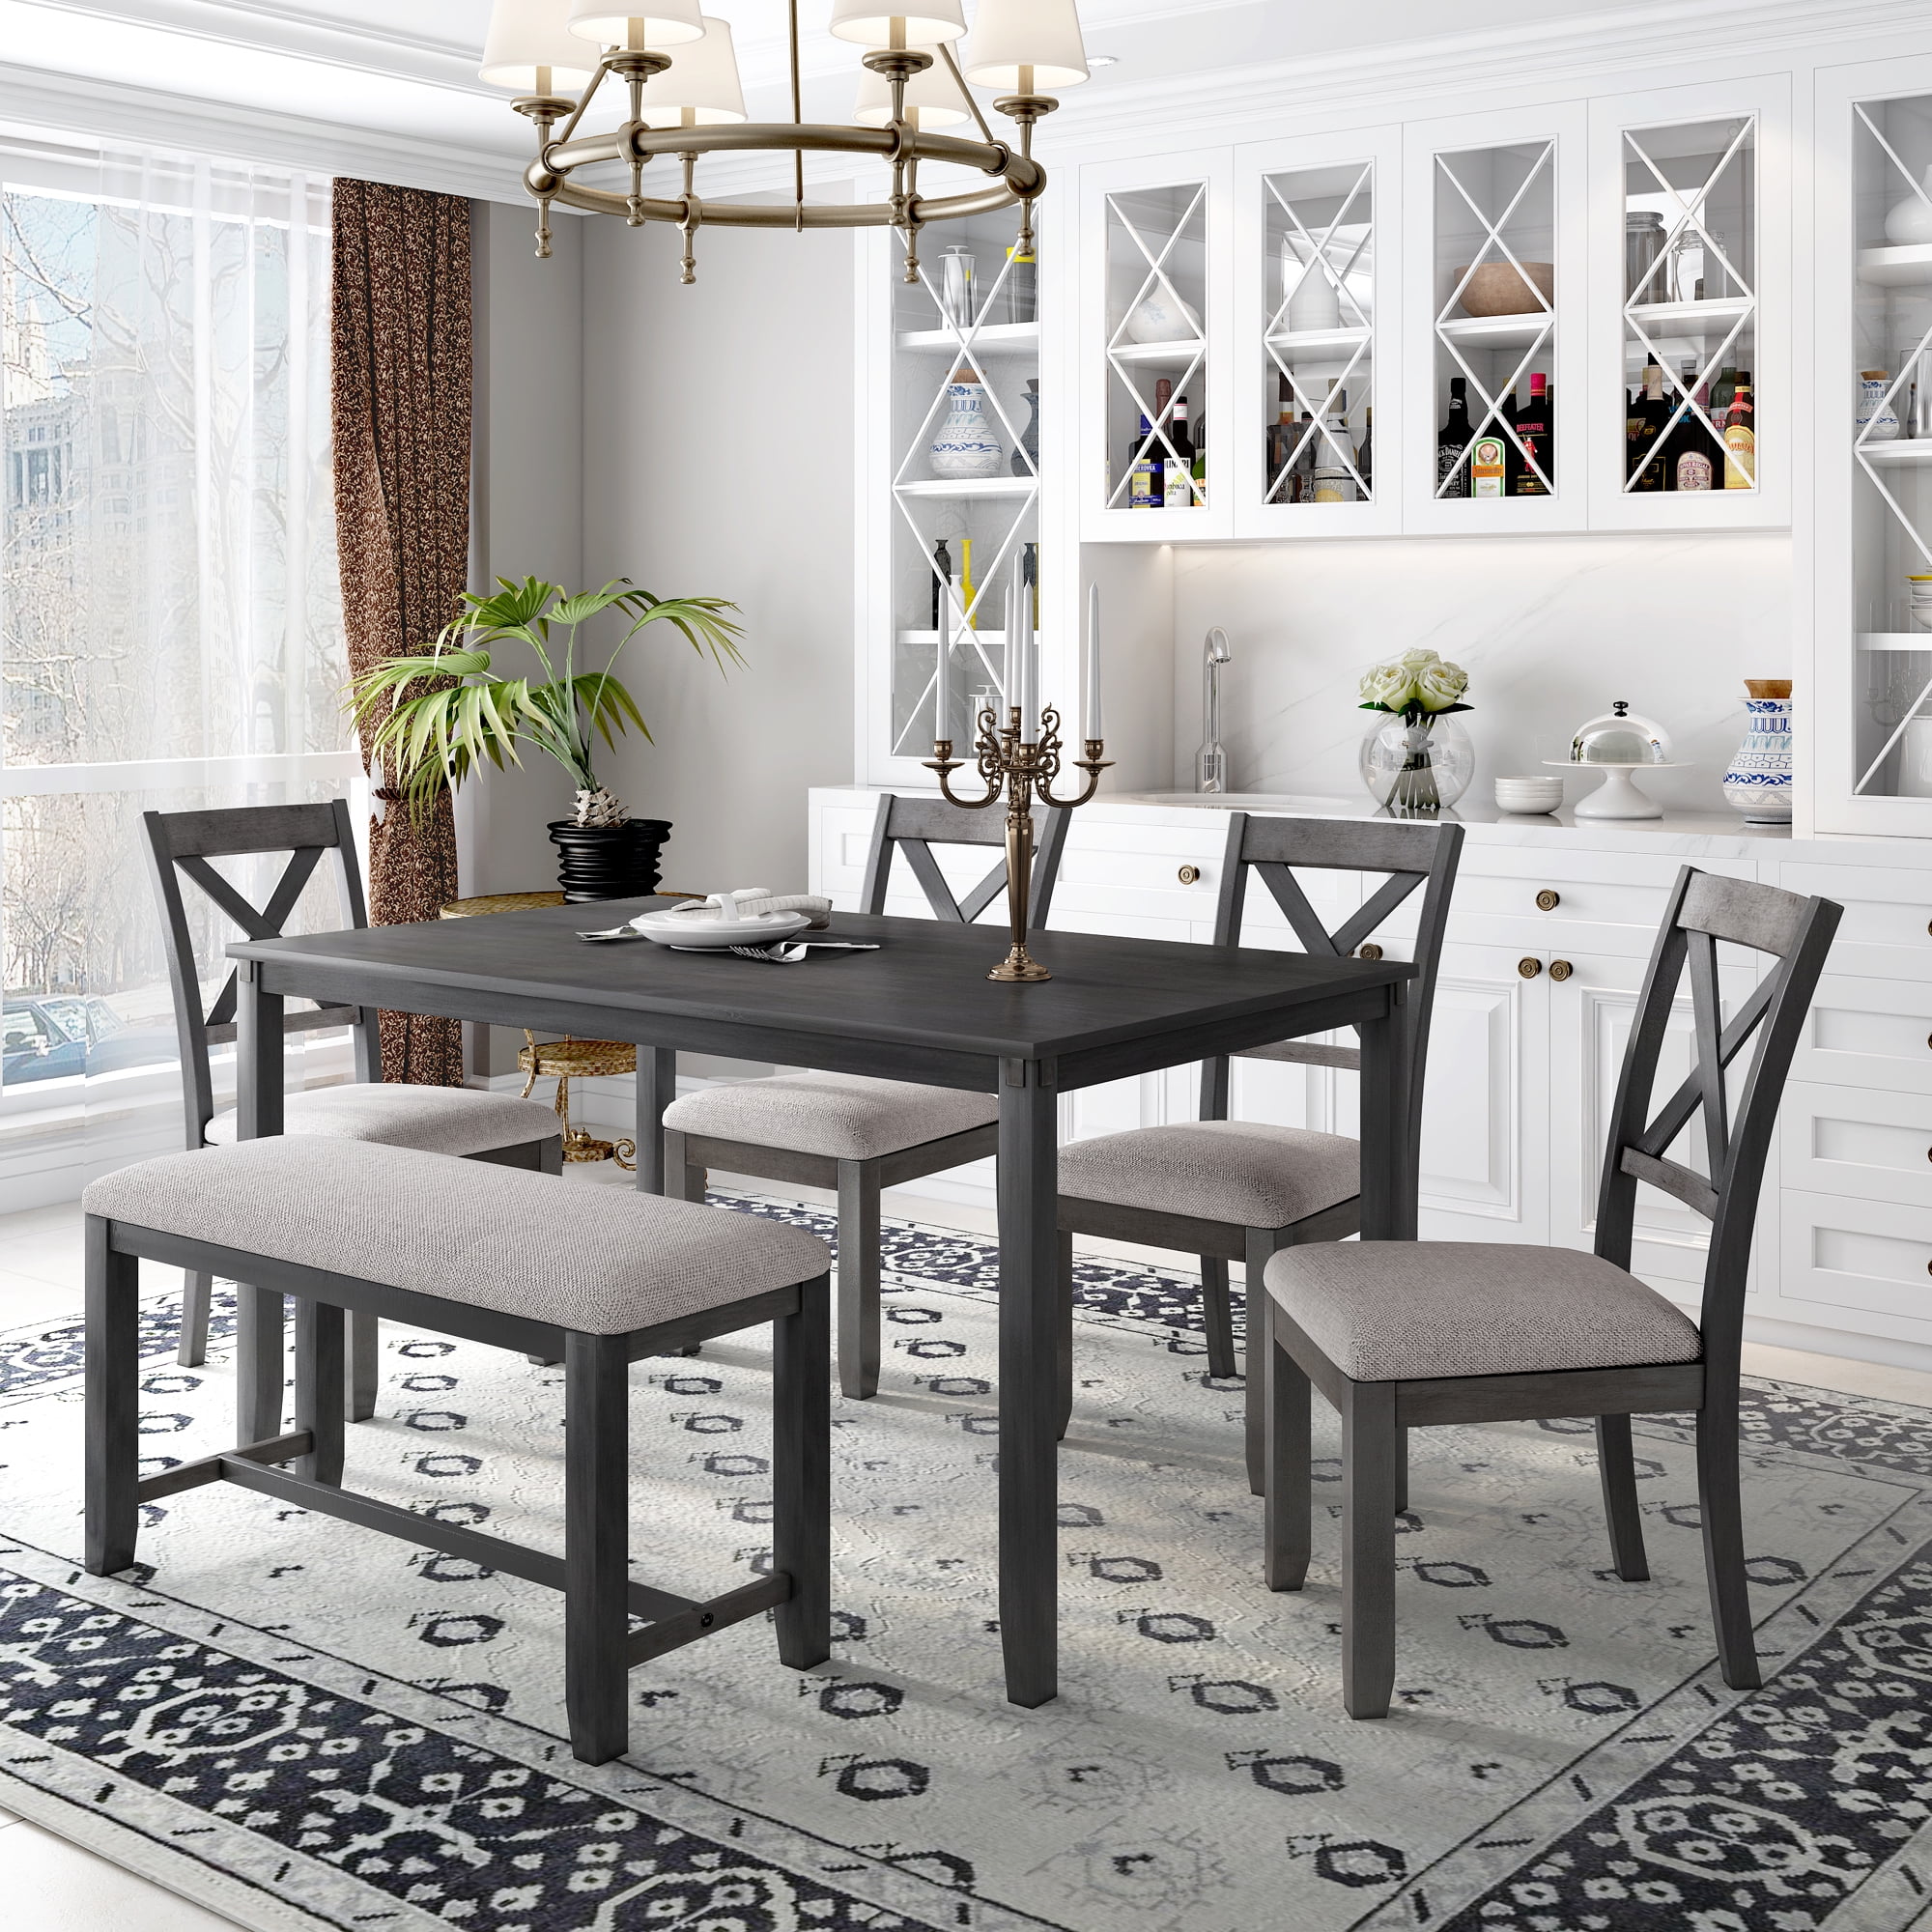 Rustic Style Dining Table Set, Apartment Dining Room Tables And Chairs For 6